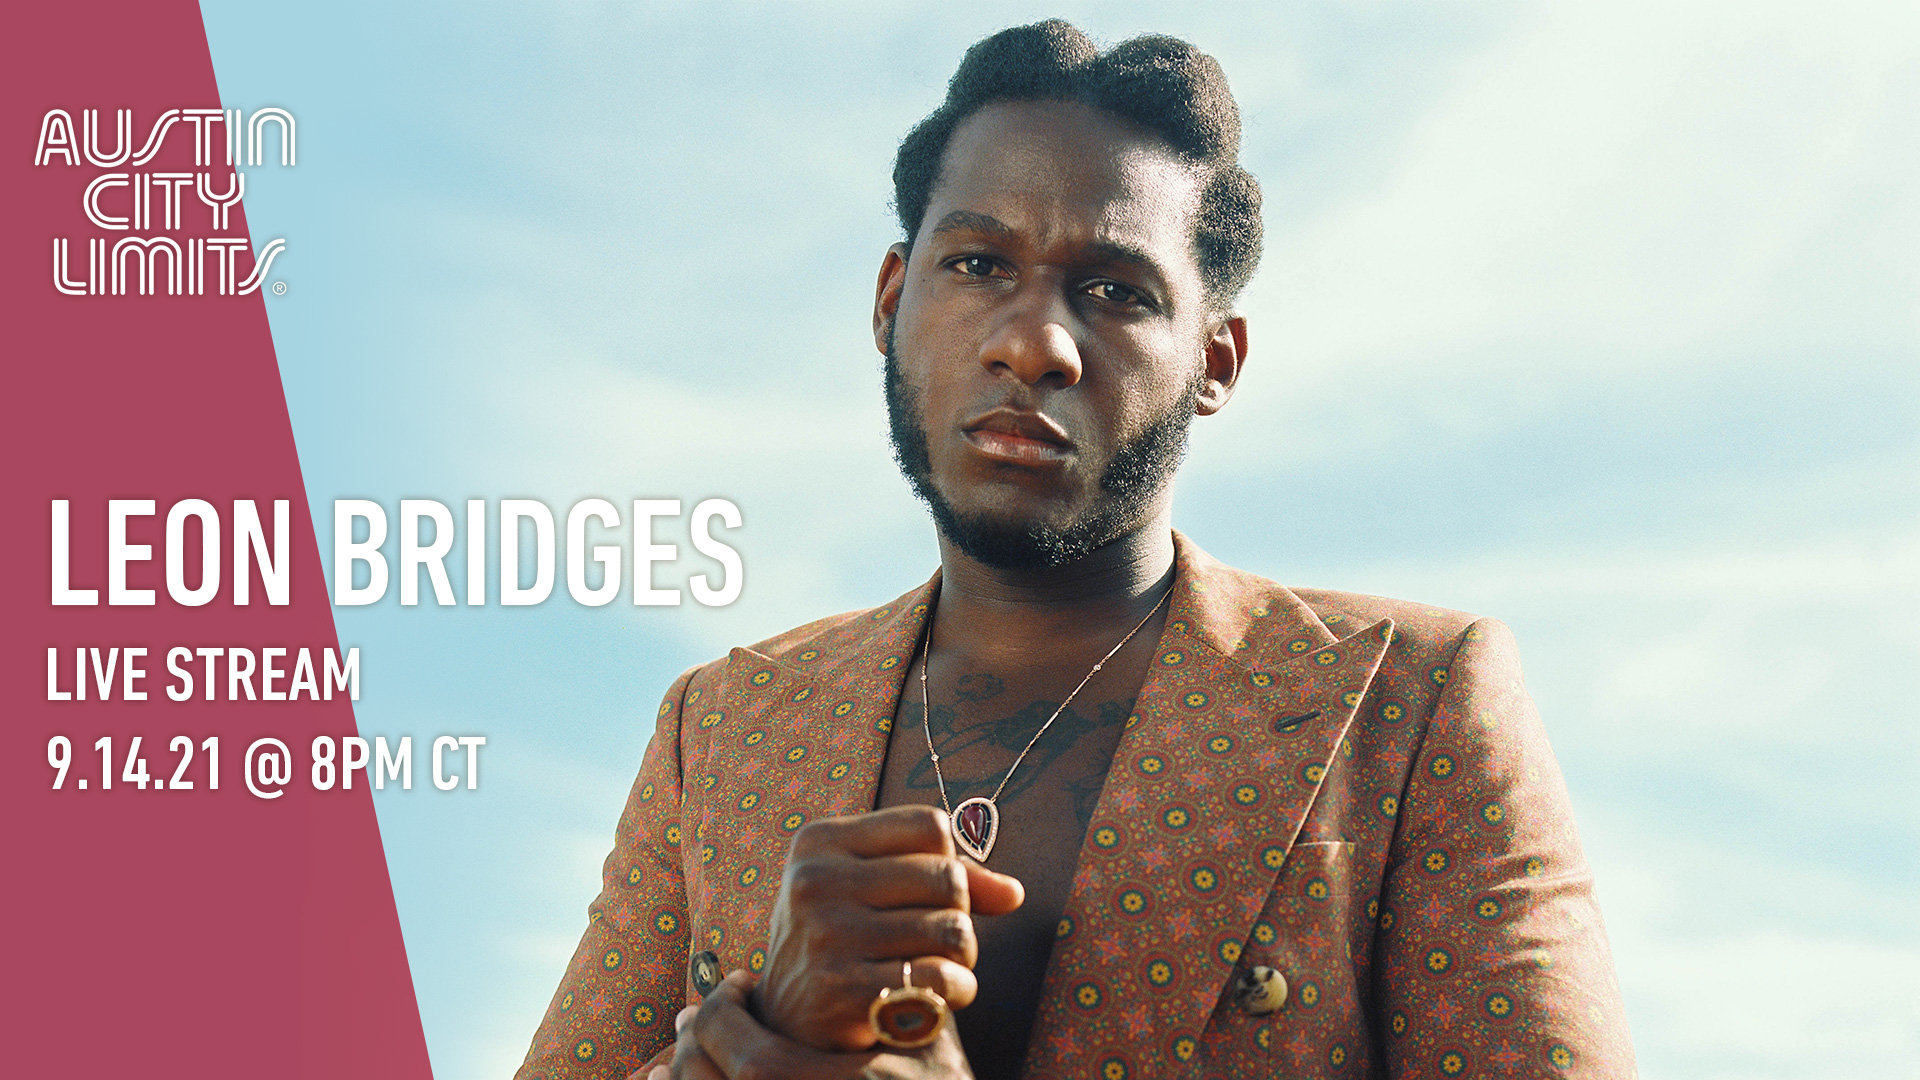 ACL to live stream Khruangbin and Leon Bridges tapings